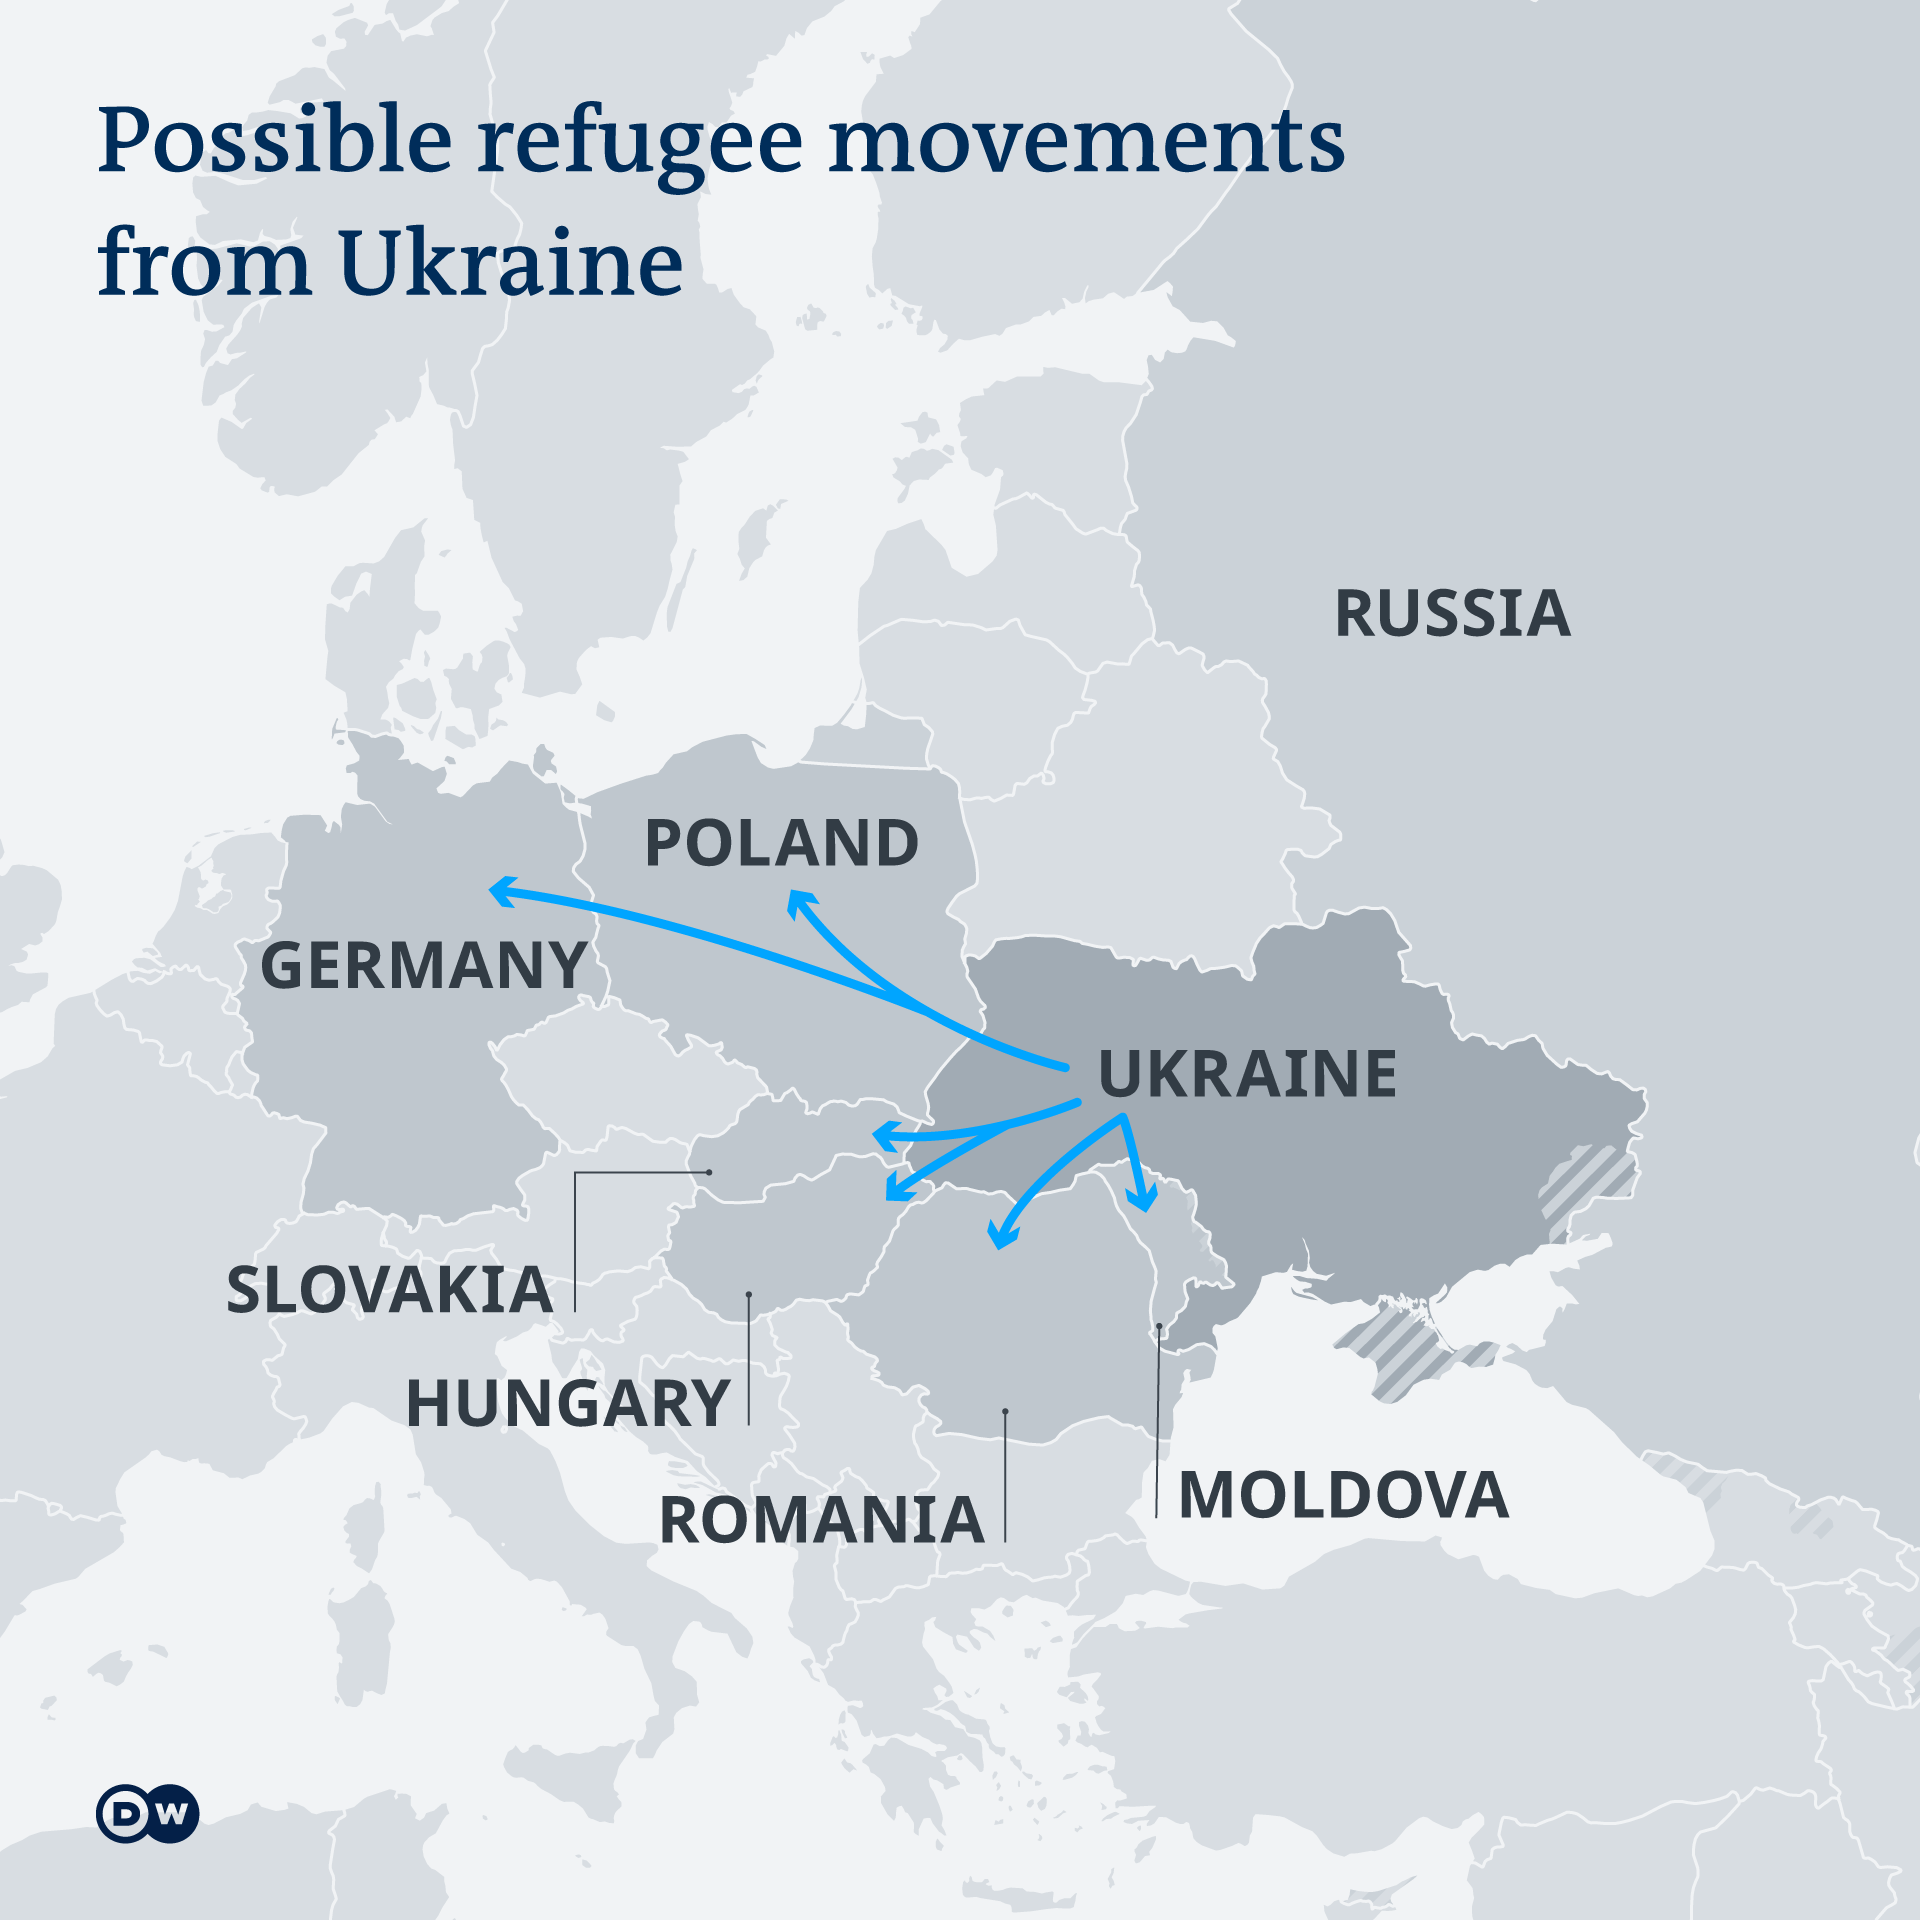 A map showing potential refugee routes from Ukraine